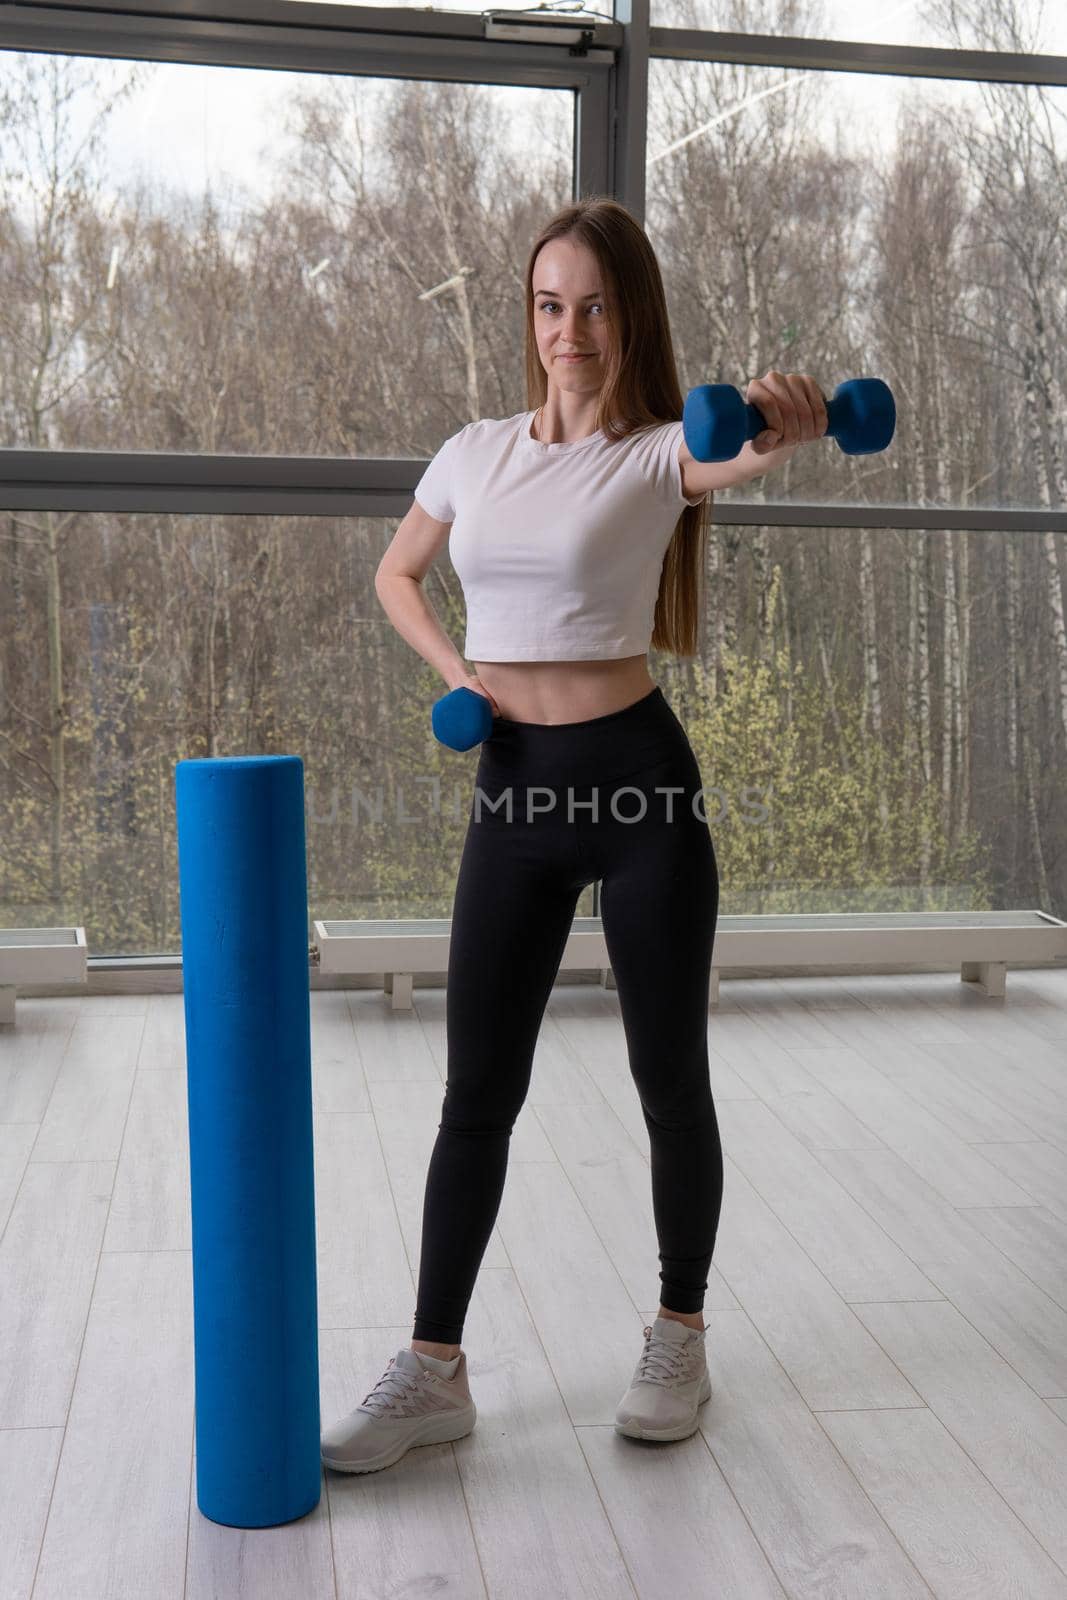 Roller and training a with skate Girl dumbbells foam roller mfr massage, from lifestyle fitness for body from strong active, balance pilates. Club aerobic home, vibration